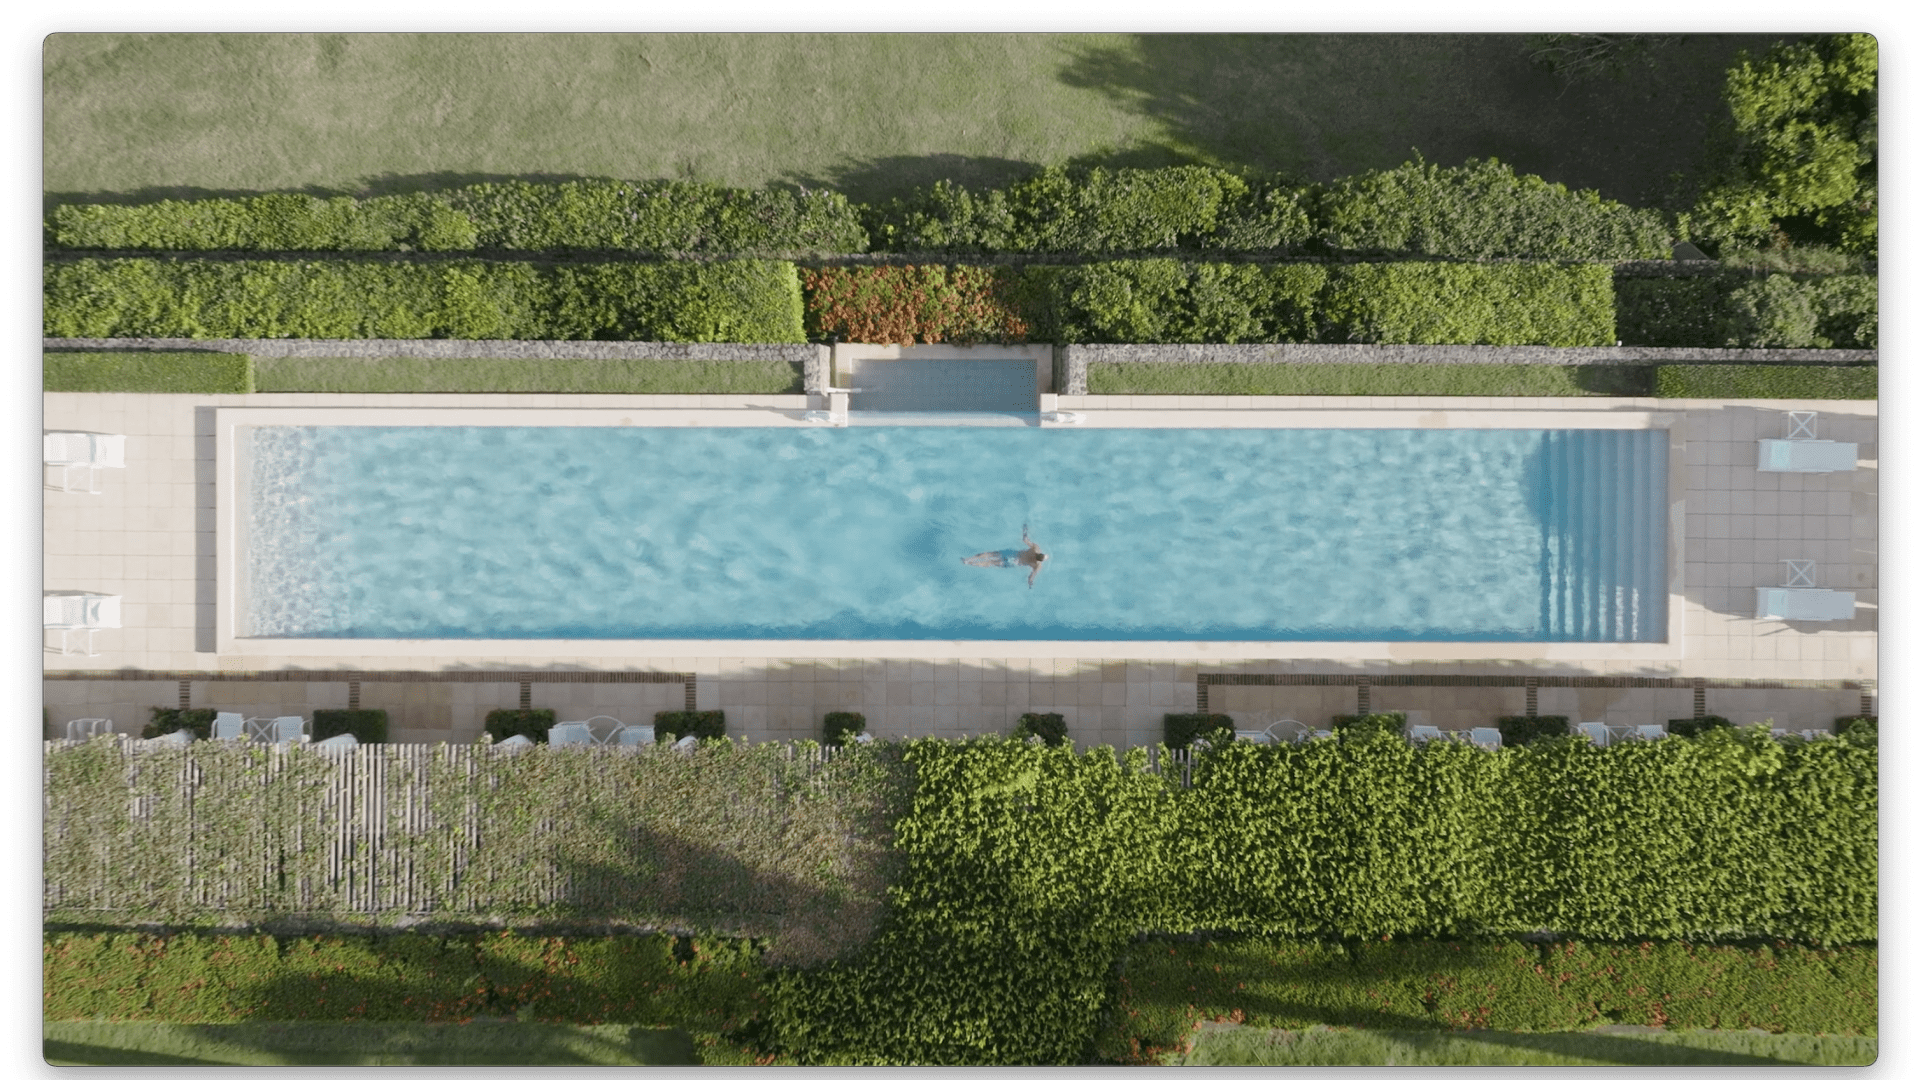 The view from above the estate's 80-ft long swimming pool.